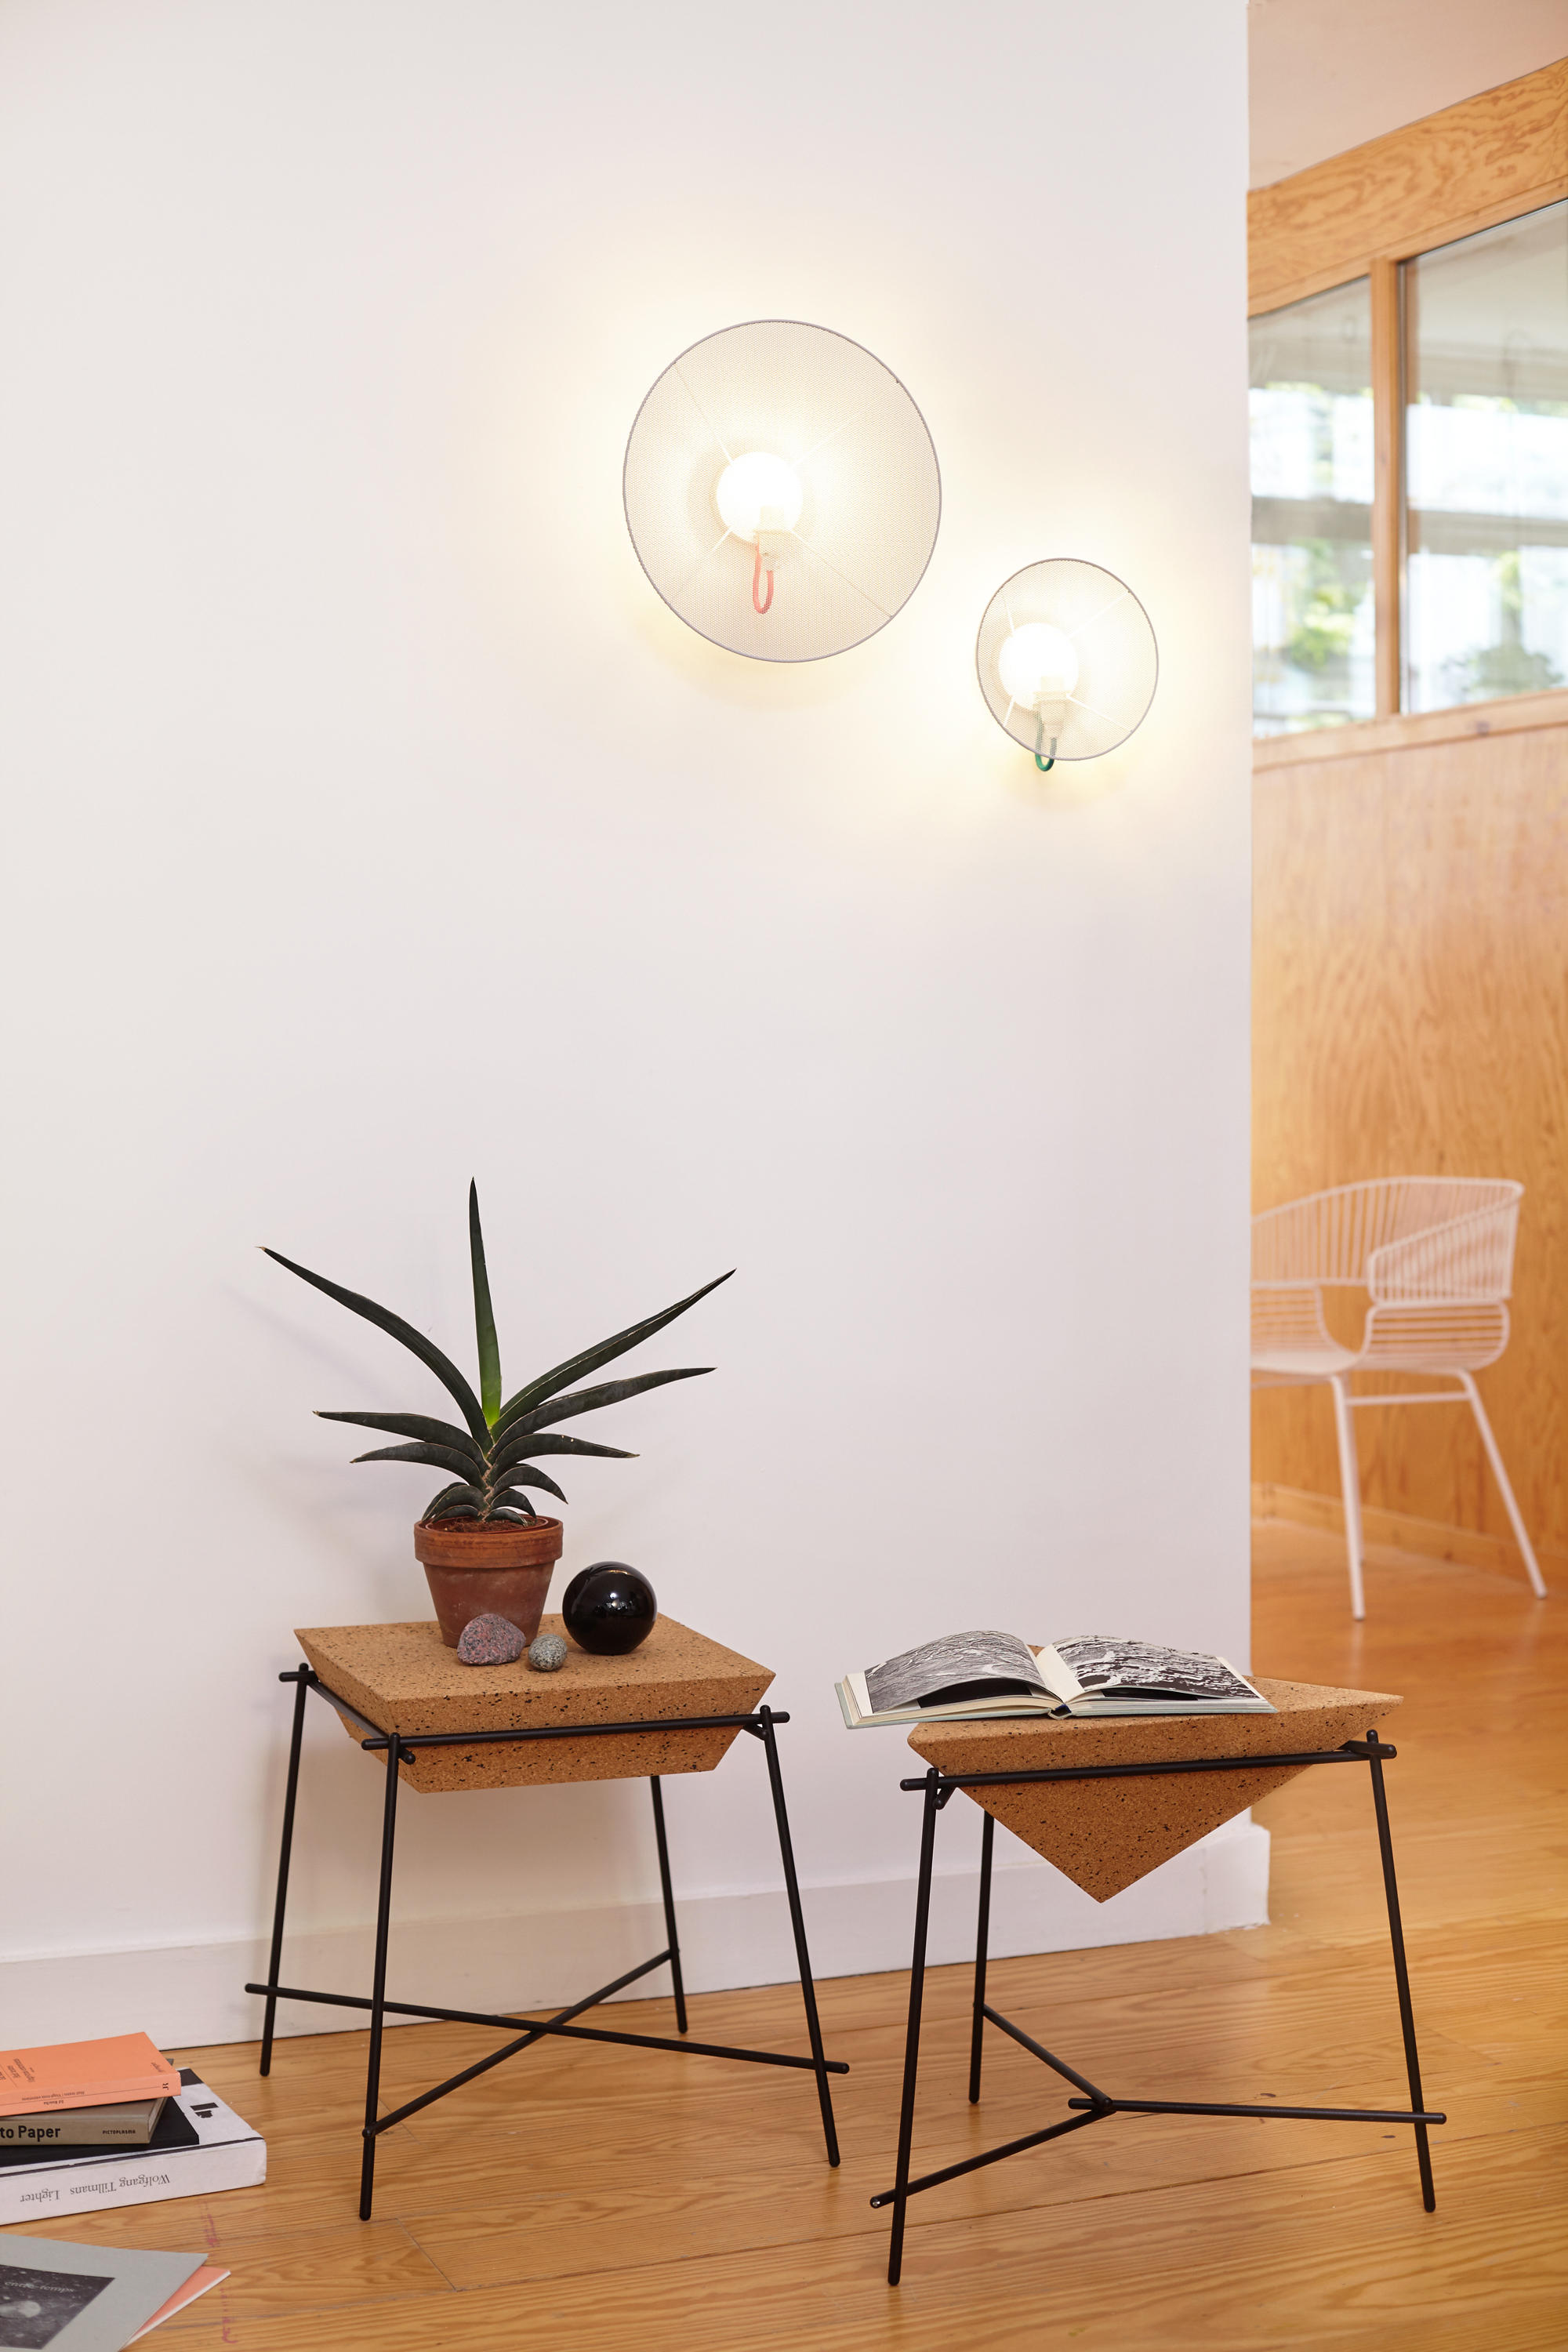 GRILLO Wall Lamp by Elise Fouin